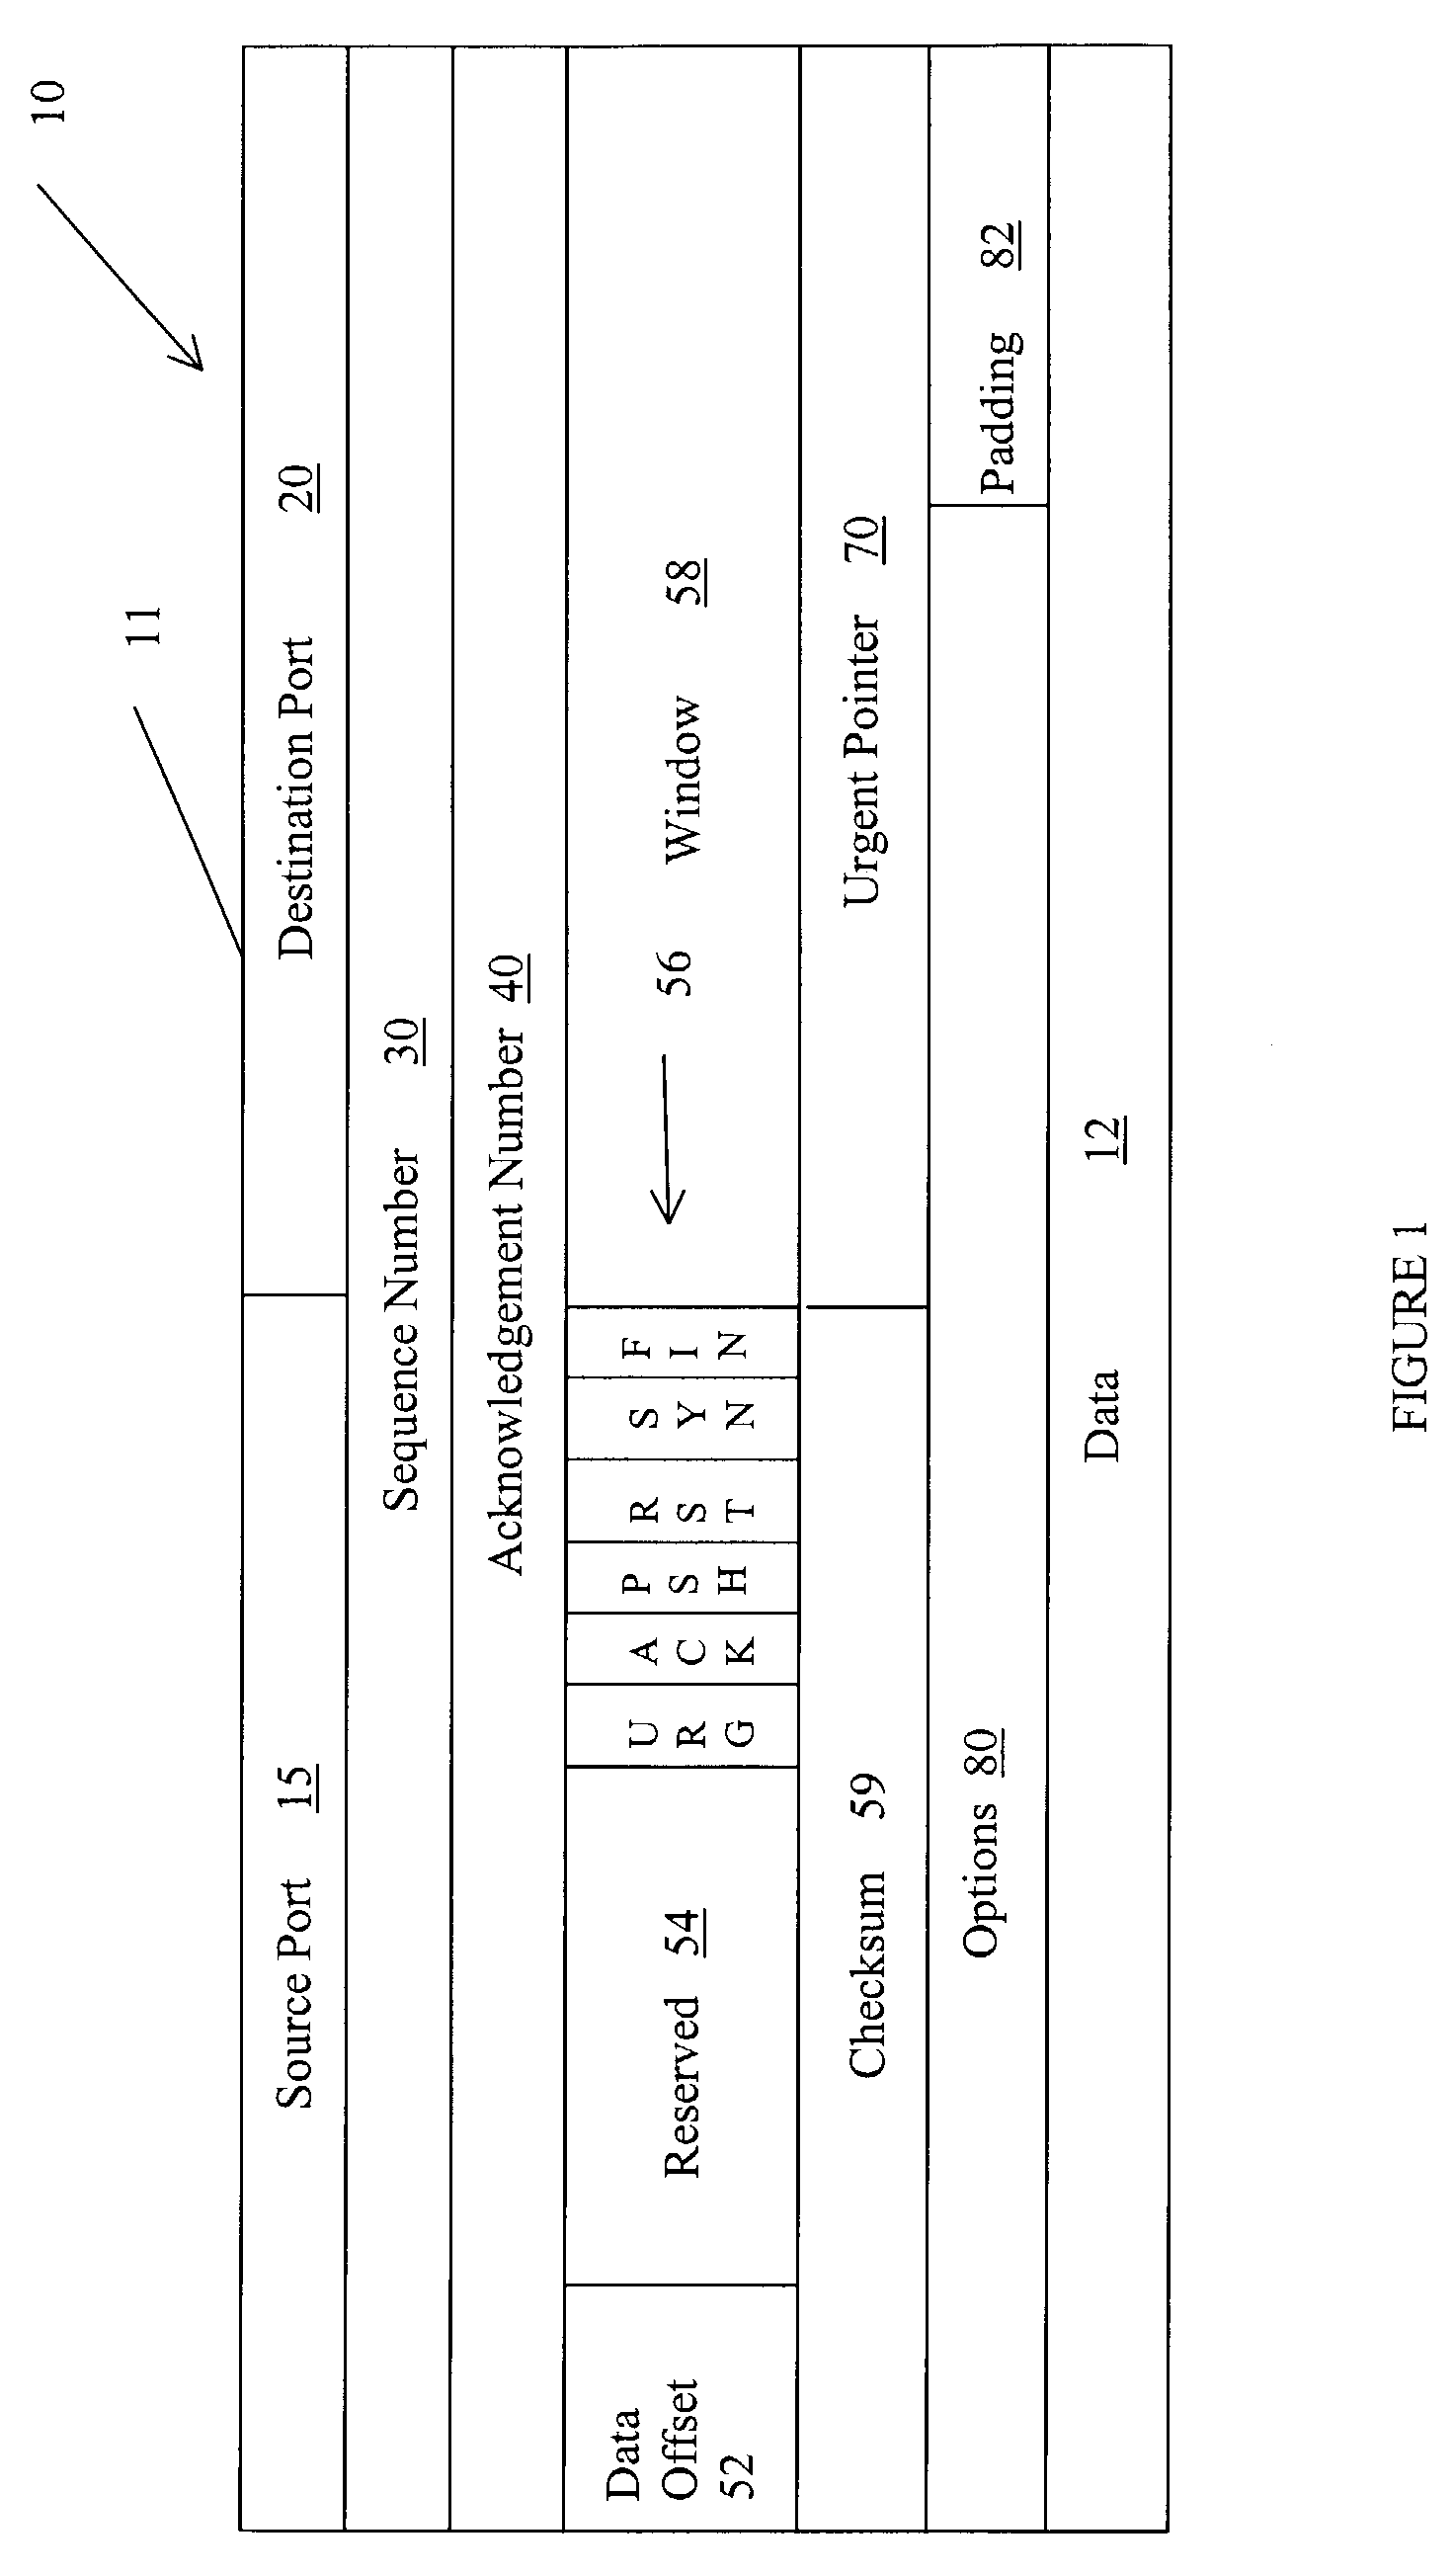 Method for splitting data and acknowledgements in a TCP session